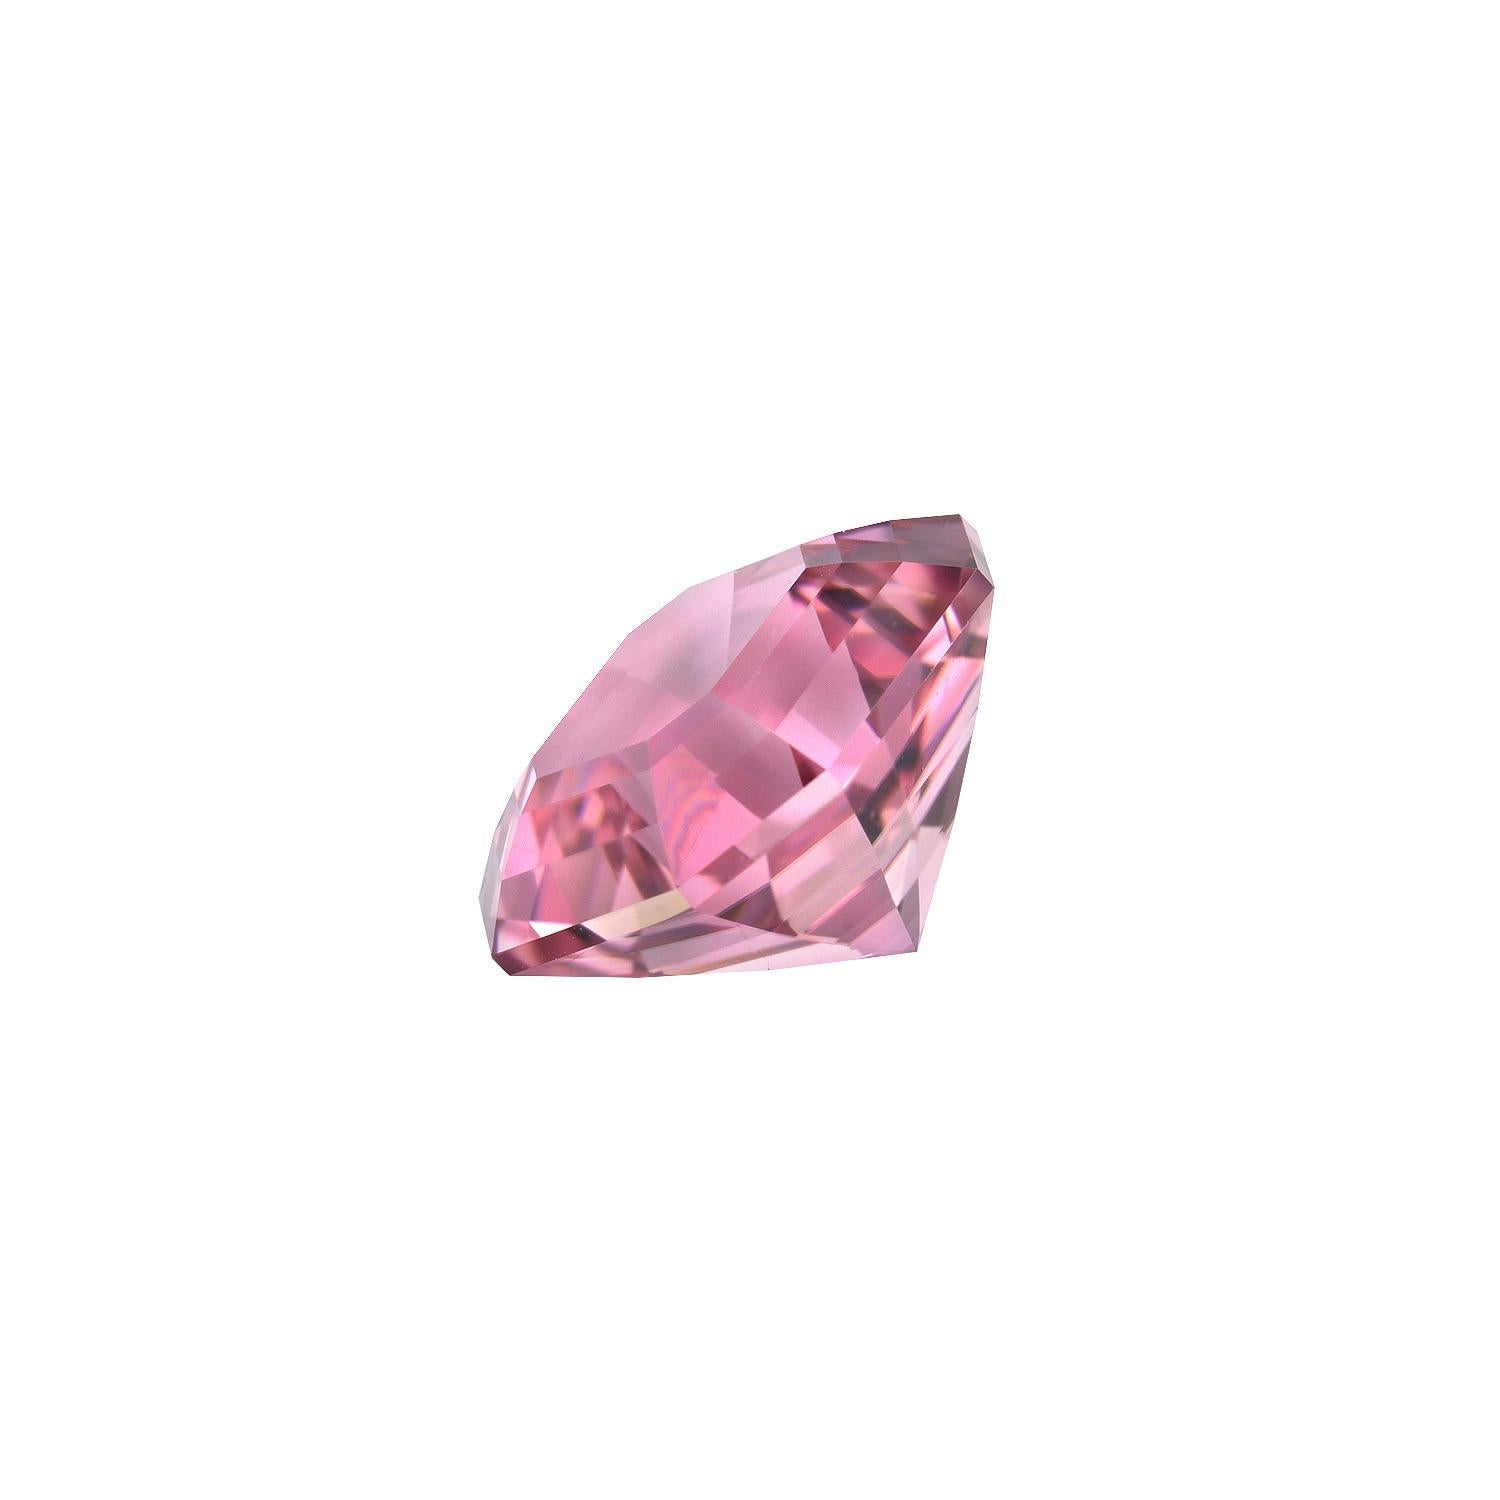 5.83 carat Pink Tourmaline square emerald-cut loose gemstone, offered unmounted to a very special lady.
Dimensions: 11 x 10.9 mm.
Returns are accepted and paid by us within 7 days of delivery.
We offer supreme custom jewelry work upon request.